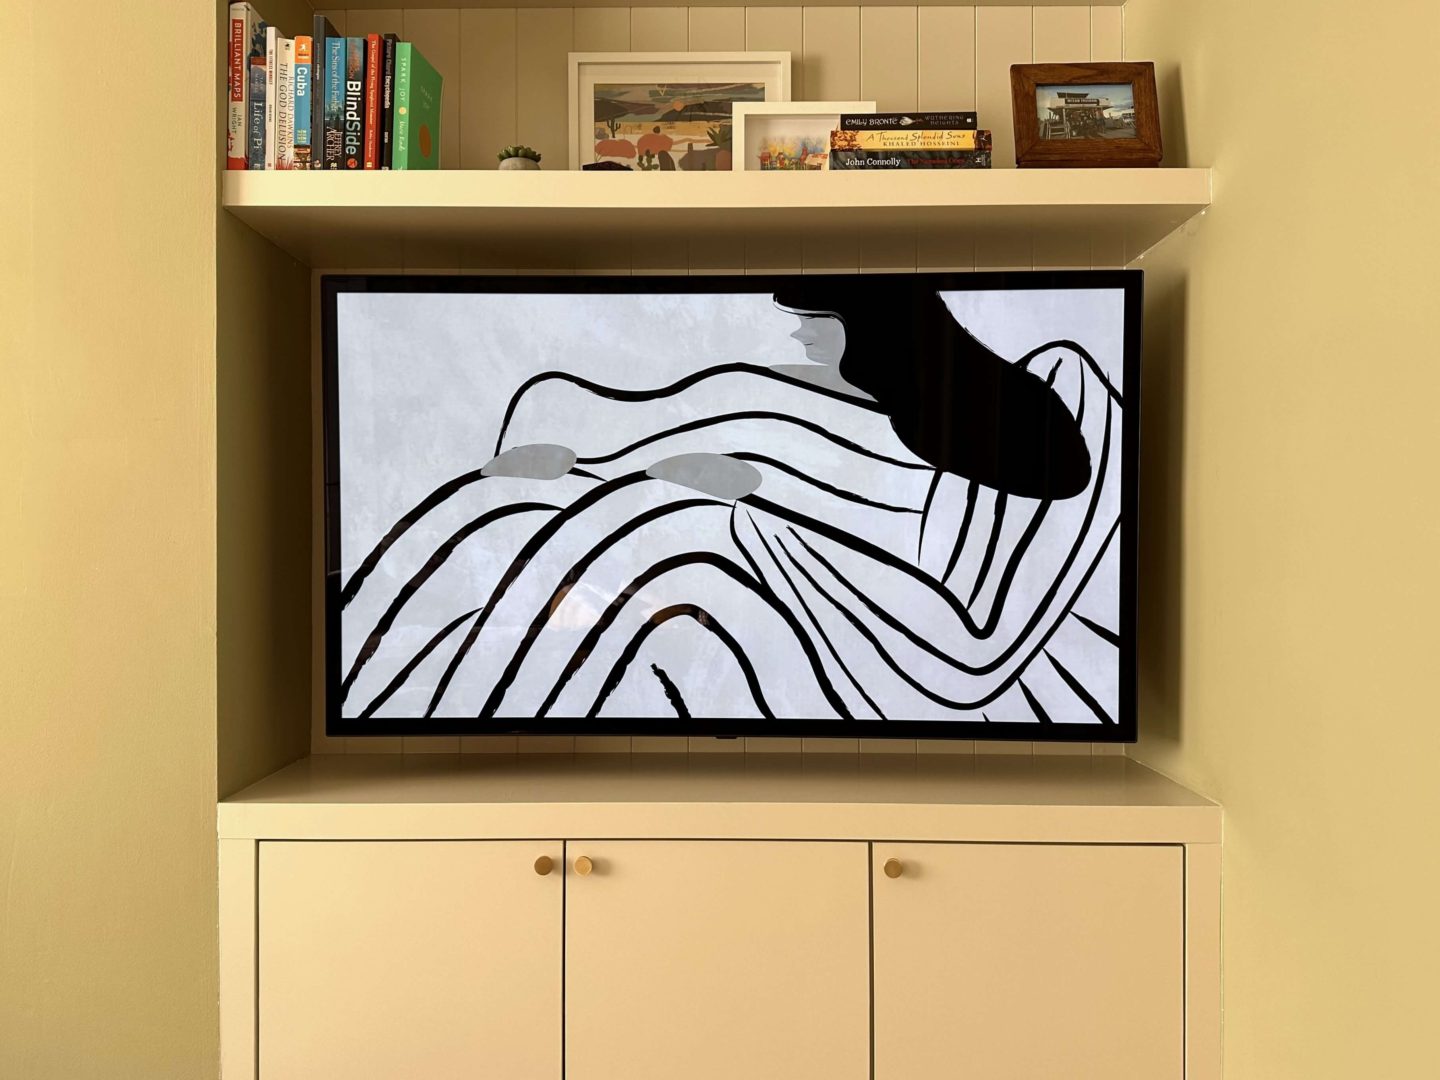 Tv artwork of a drawing of a woman.